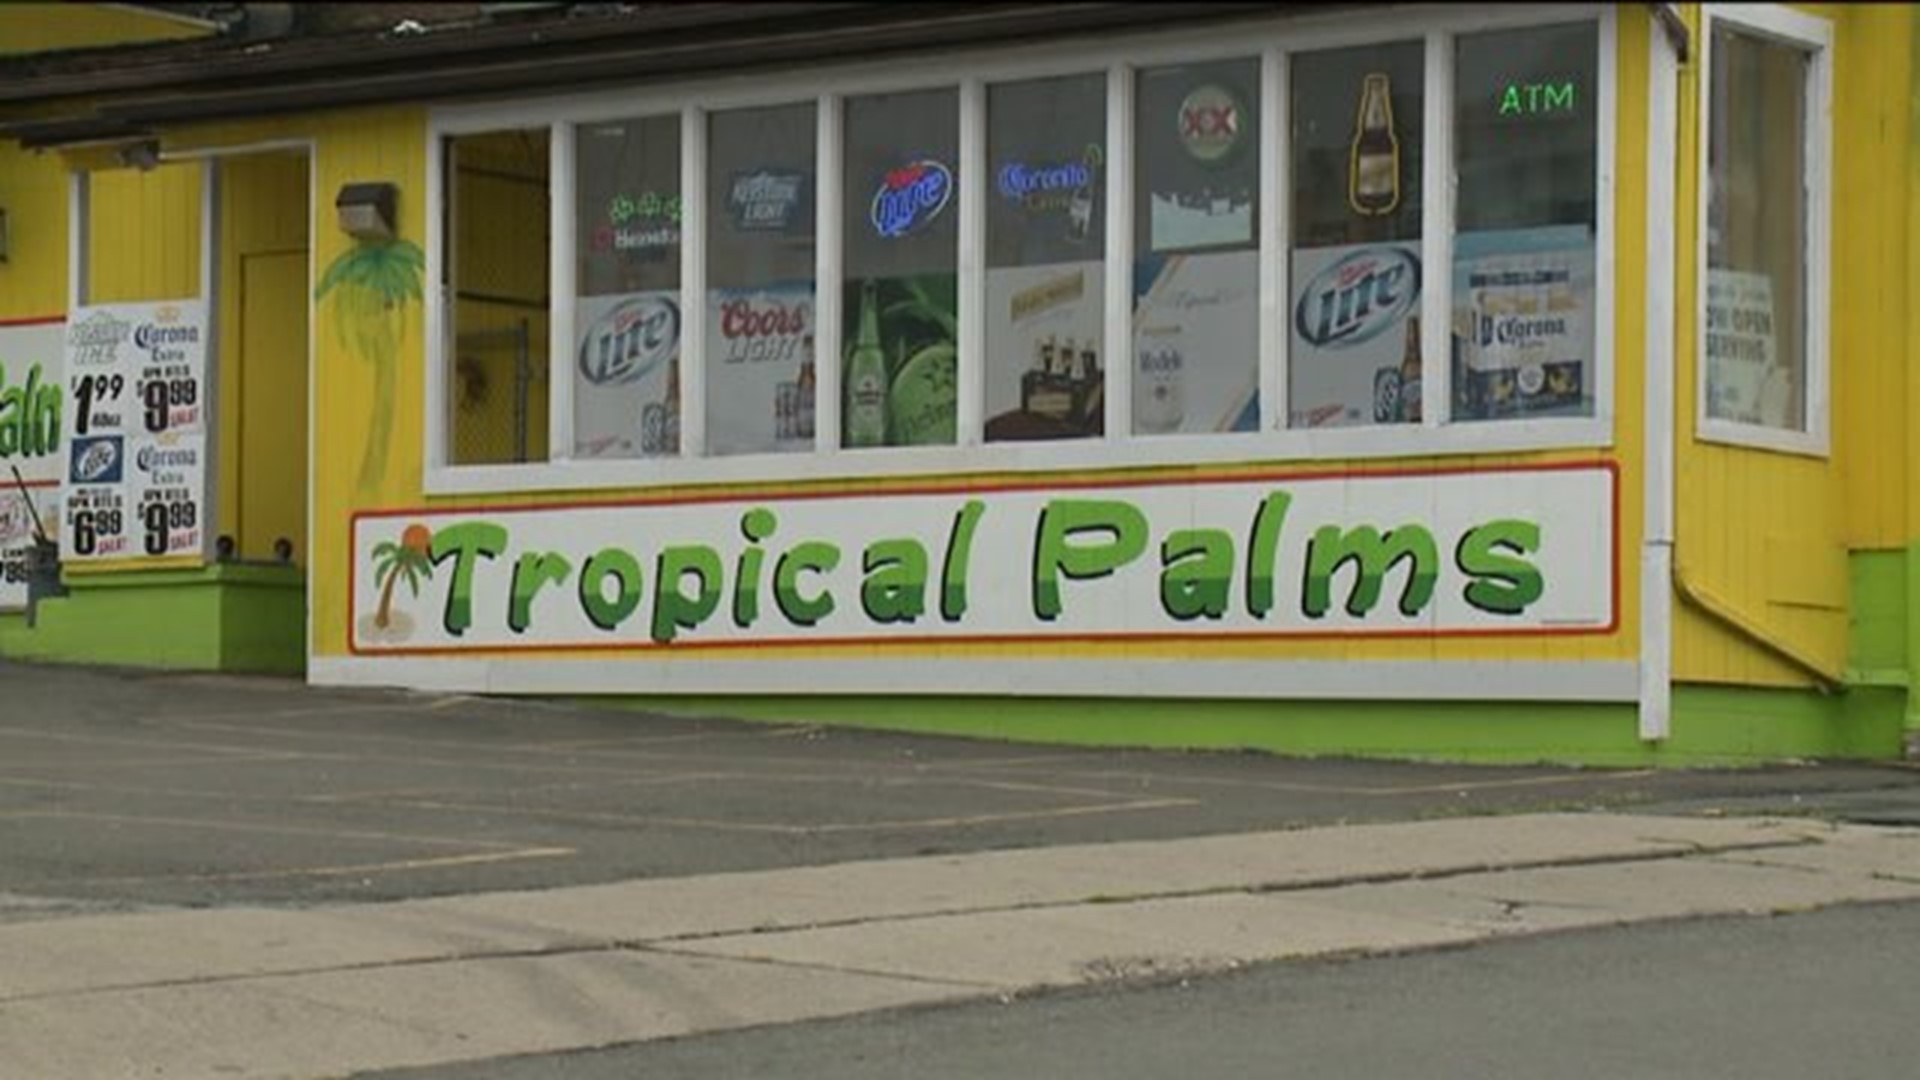 Not So 'Tropical' Time in Wilkes-Barre